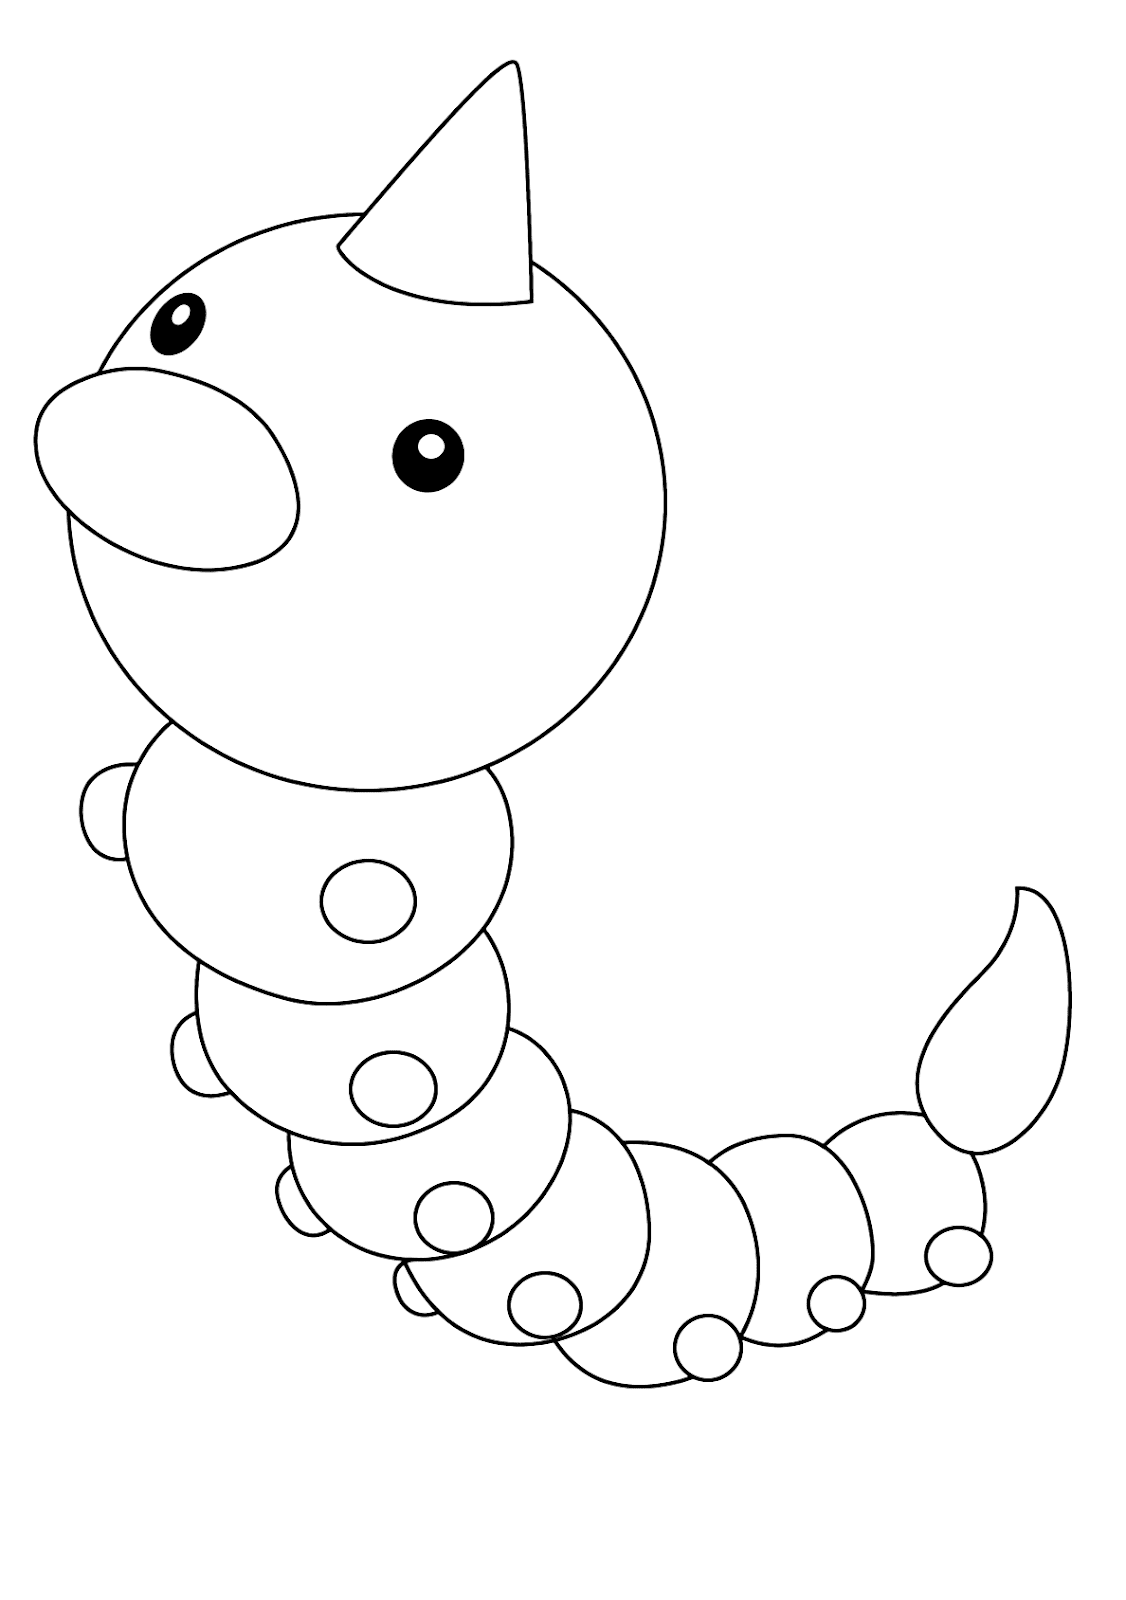 Free Collection of Weedle Coloring Pages to Download - Free Pokemon